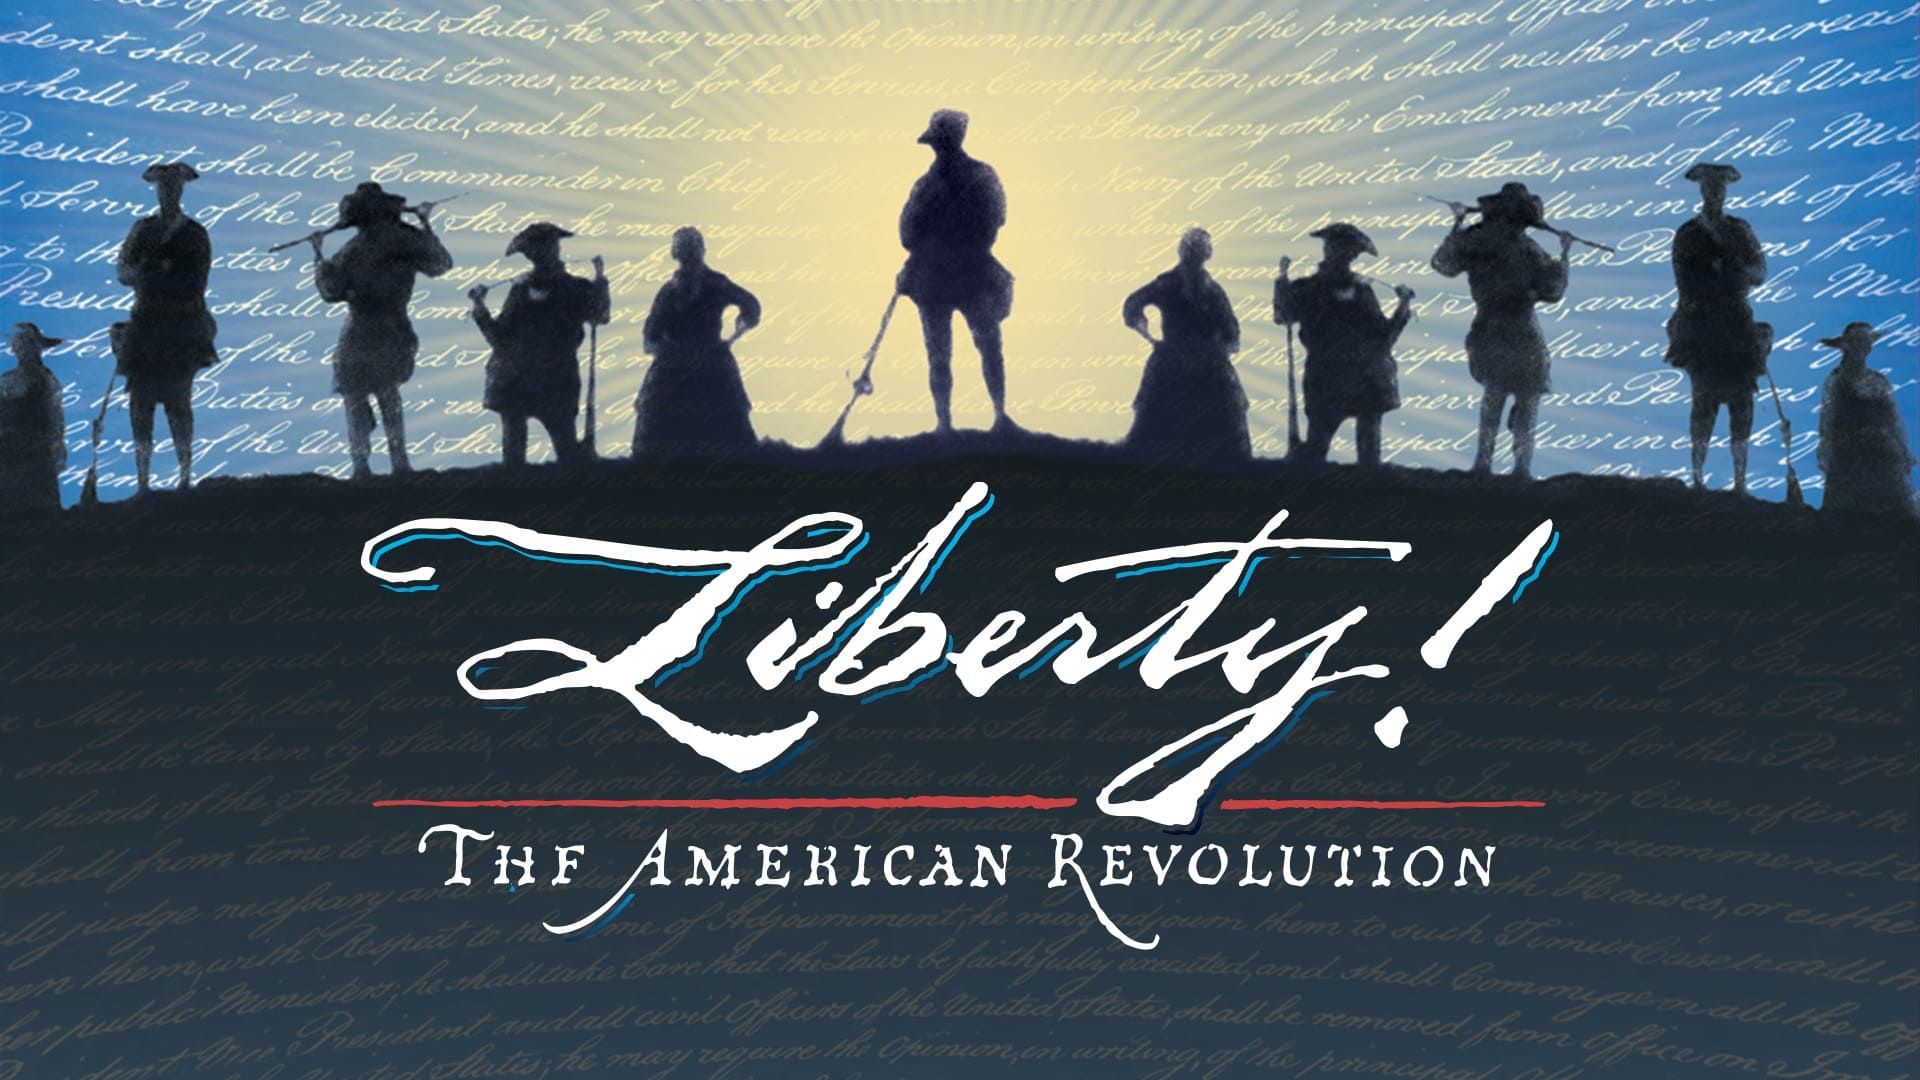 Liberty! The American Revolution background